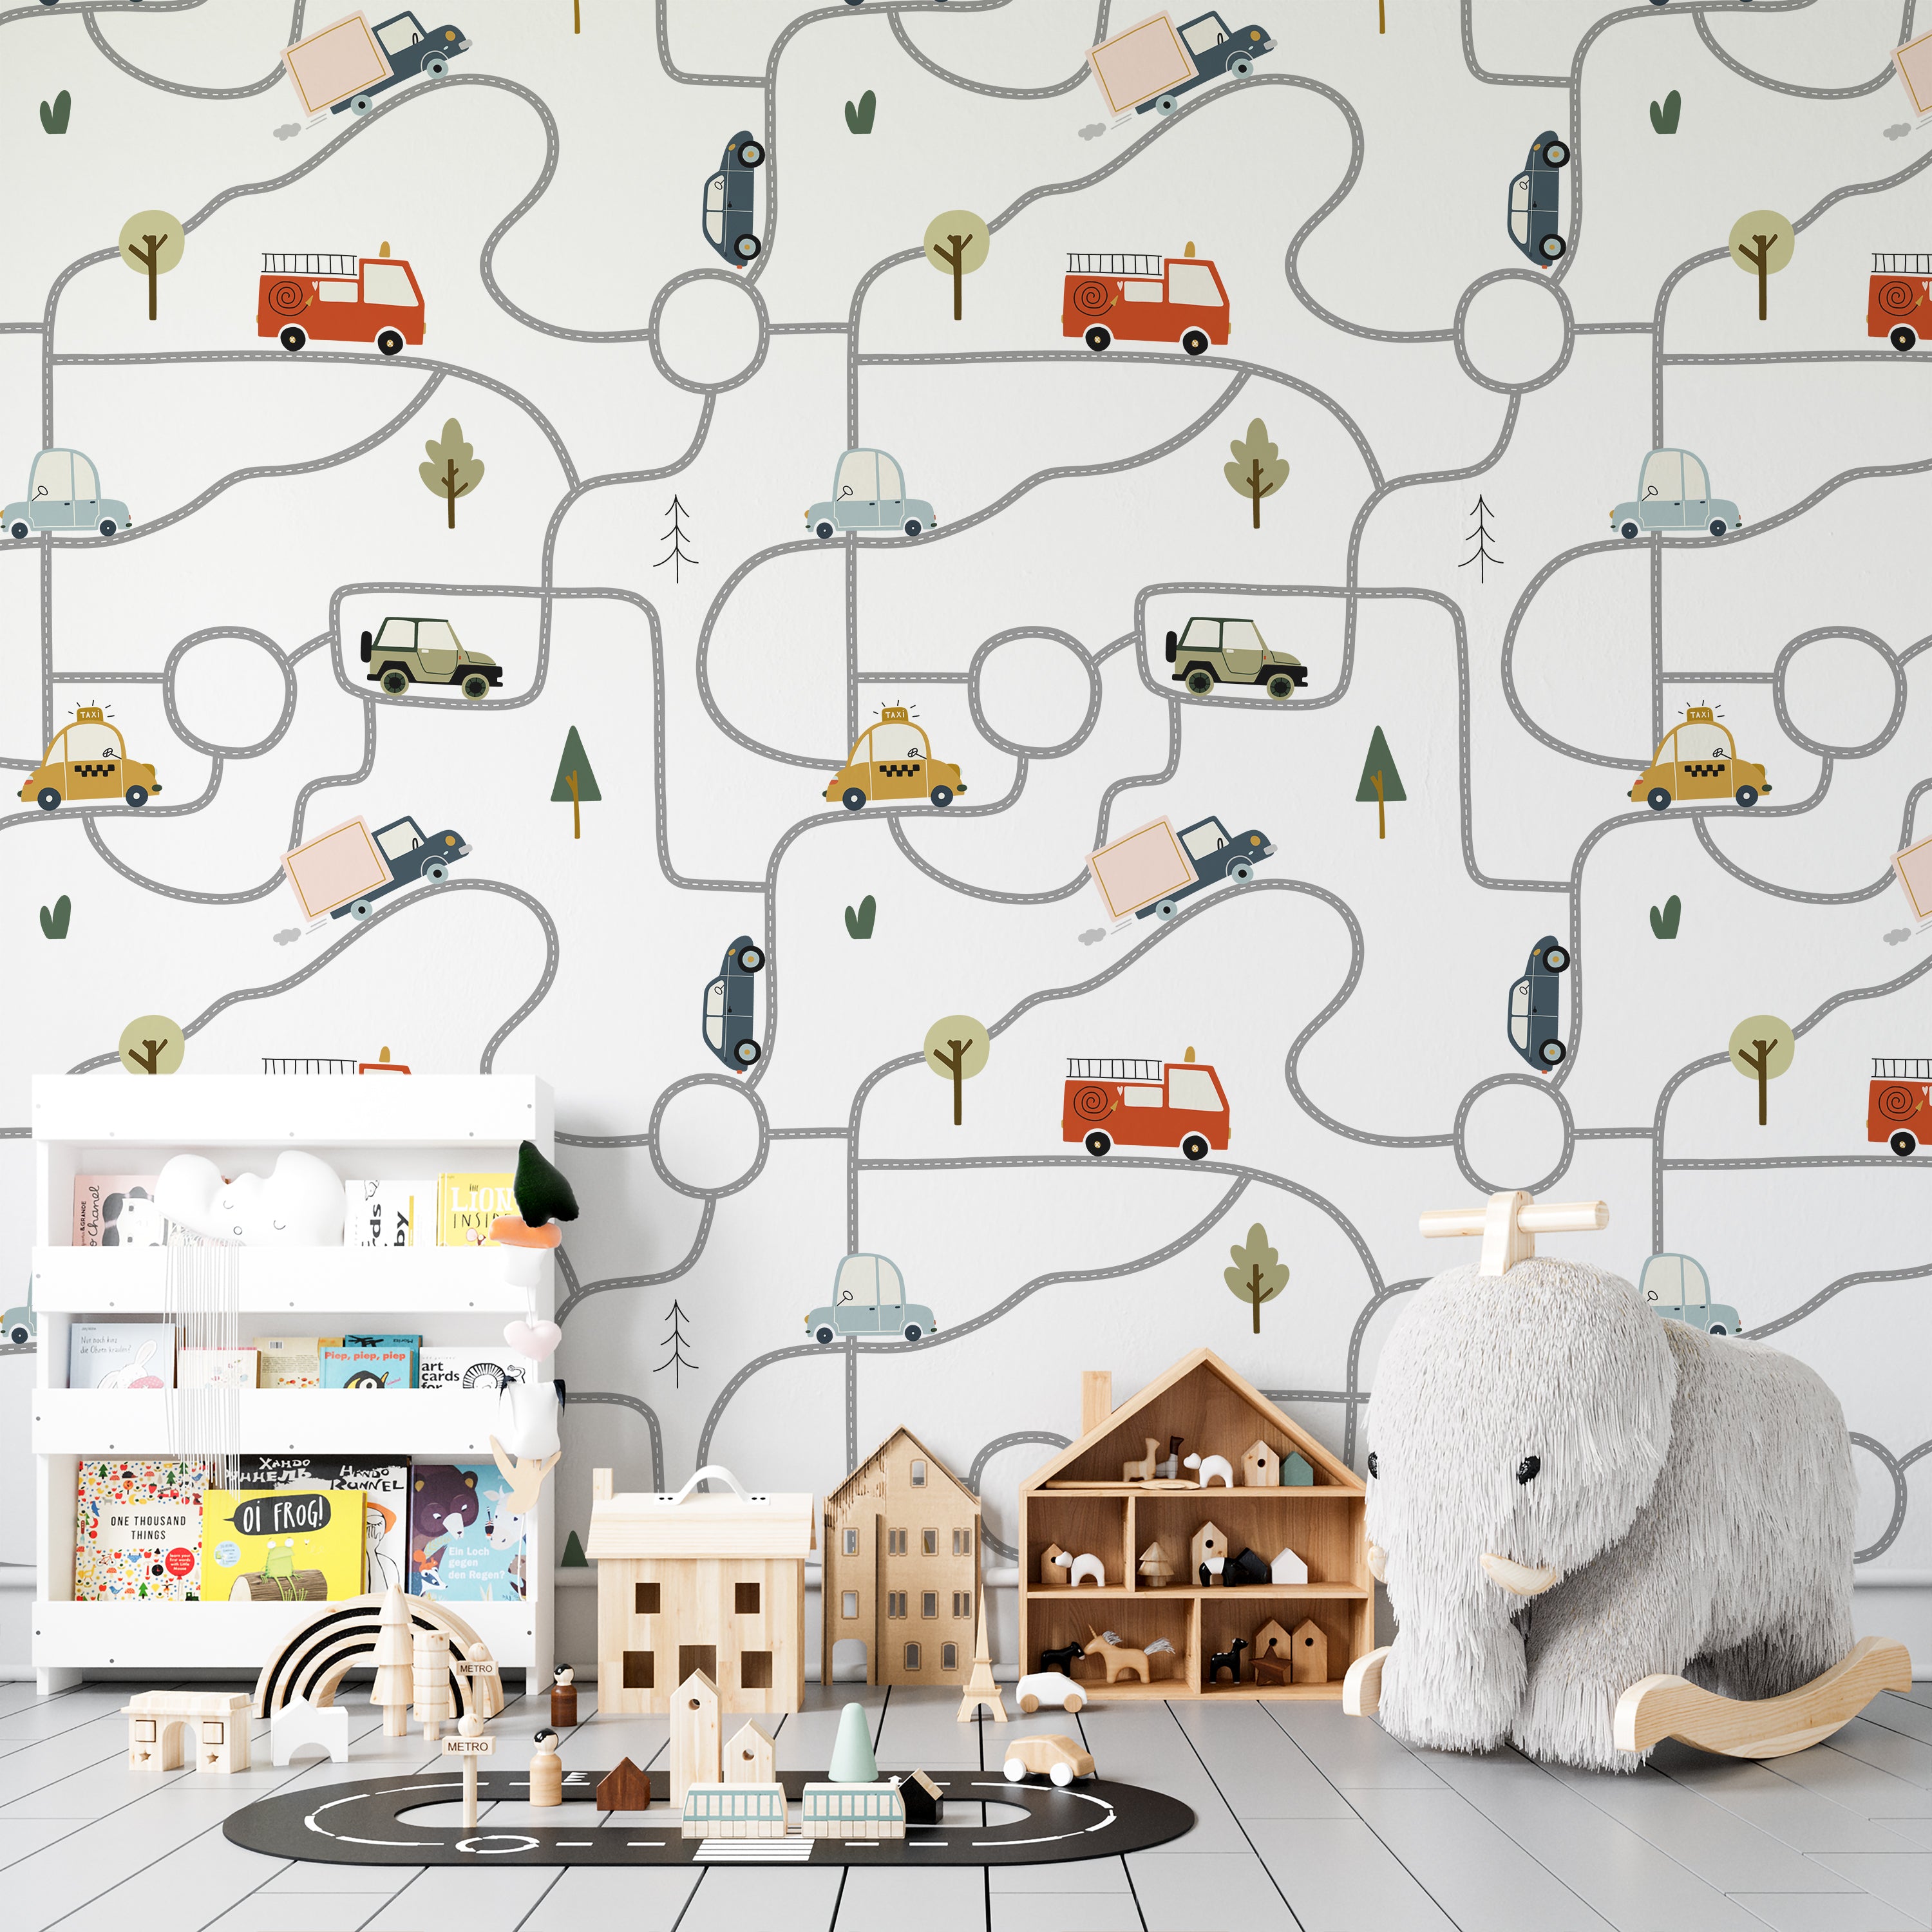 Child's play area with walls adorned by Car and Map Wallpaper, depicting a fun and intricate road map with various vehicles traveling along it. The setting is enhanced with children's toys and wooden furniture, creating an inviting and playful environment for learning and imagination